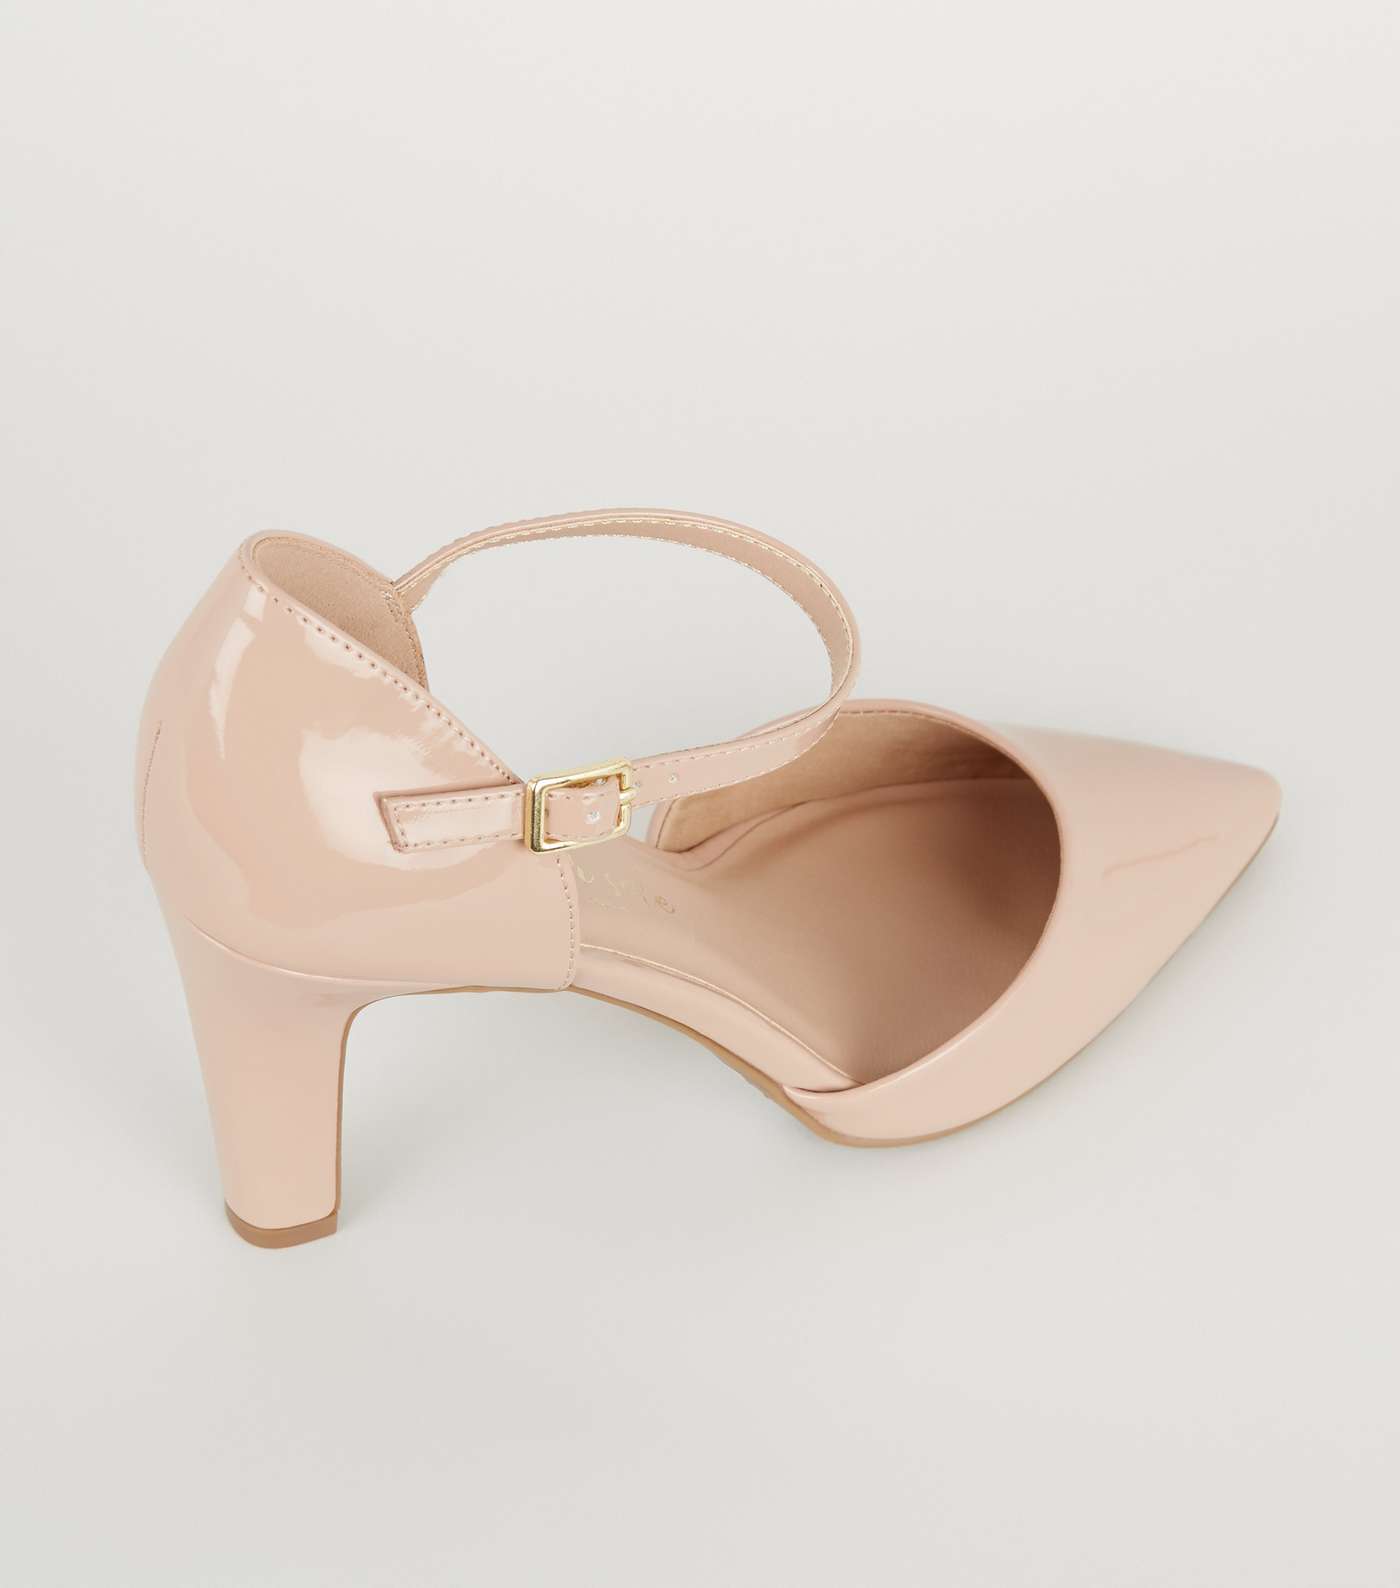 Cream Patent 2 Part Pointed Court Shoes Image 4